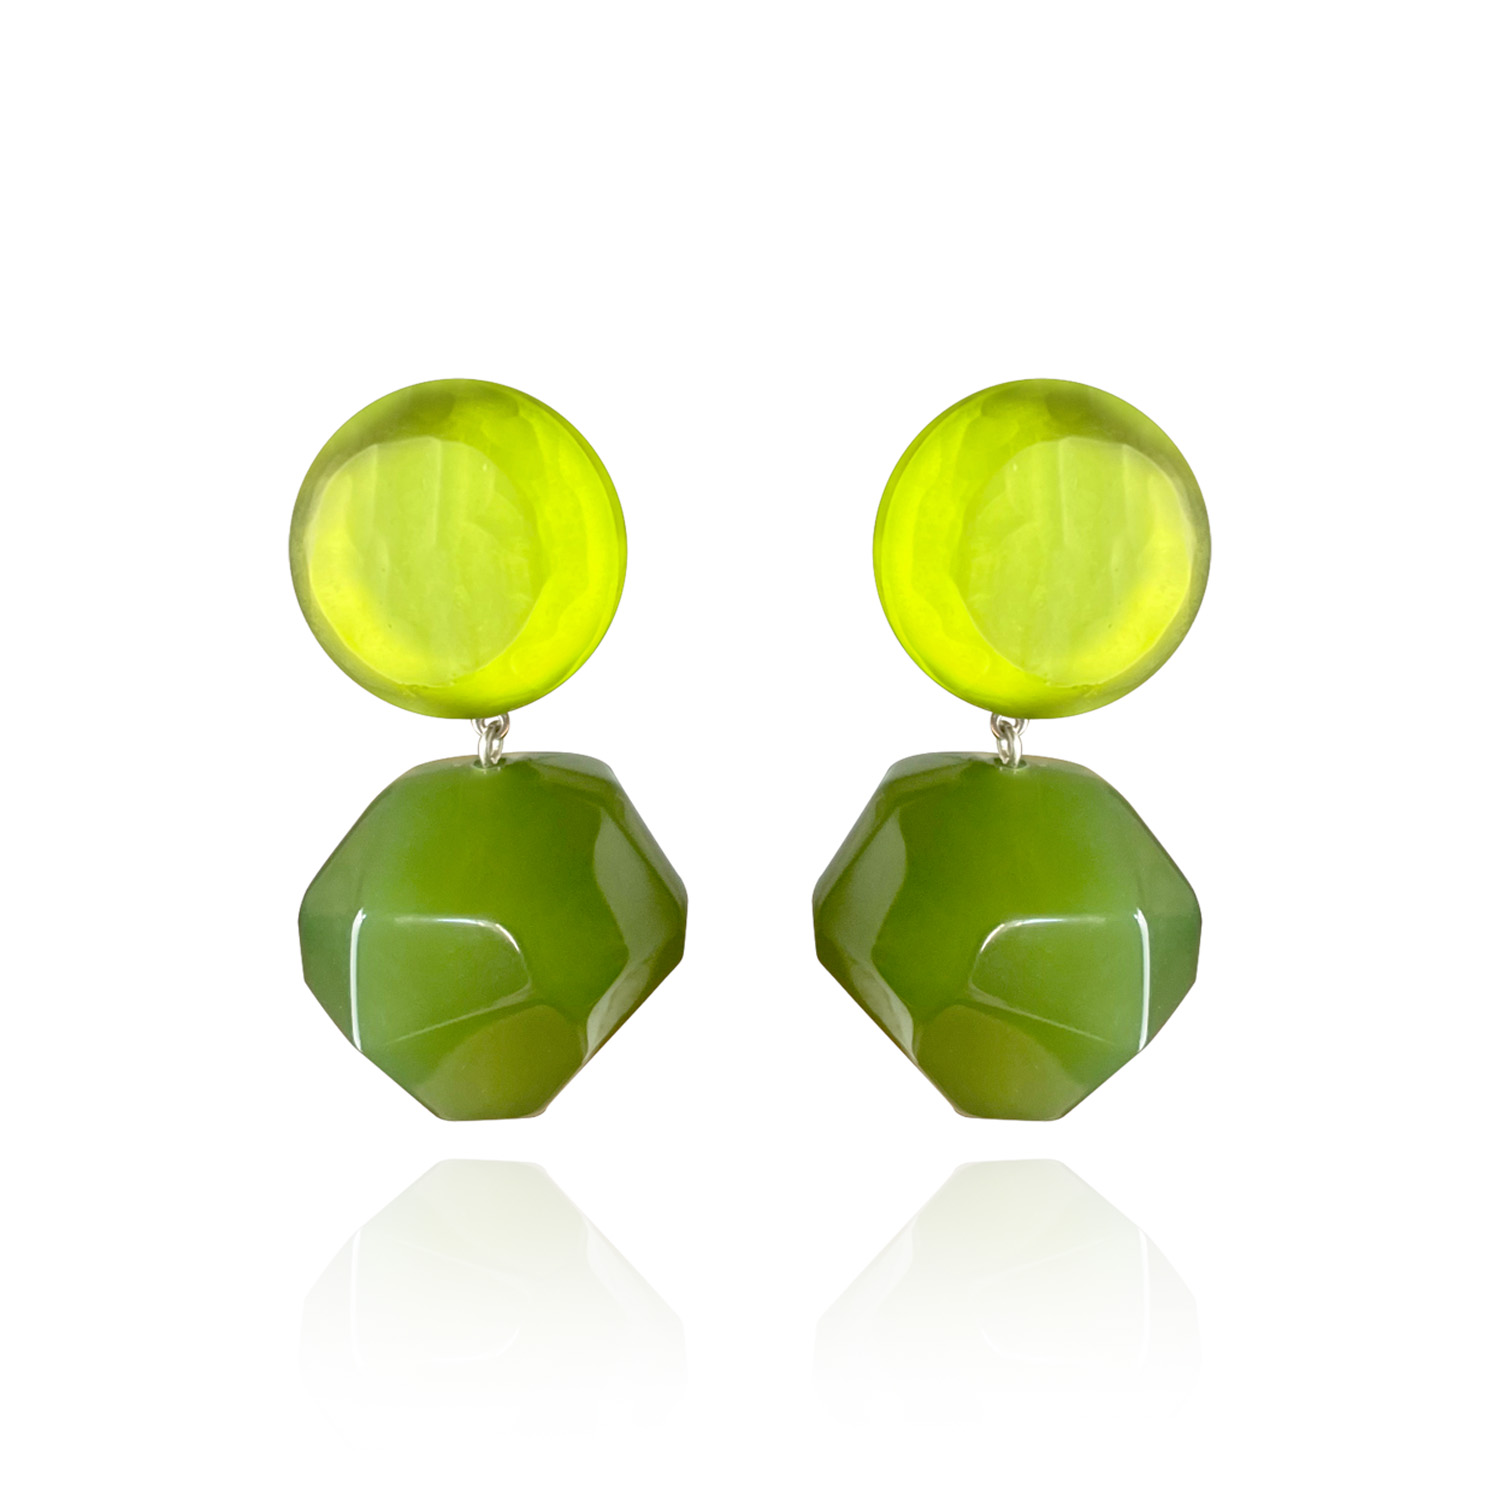 Eco Market Malta - Clipon earrings 🌟Product of the week🌟 Simplicity is  the ultimate sophistication ! Inspired by the beauty of nature, without  plastic and packaged with recyclable paper. Made with nickel-free